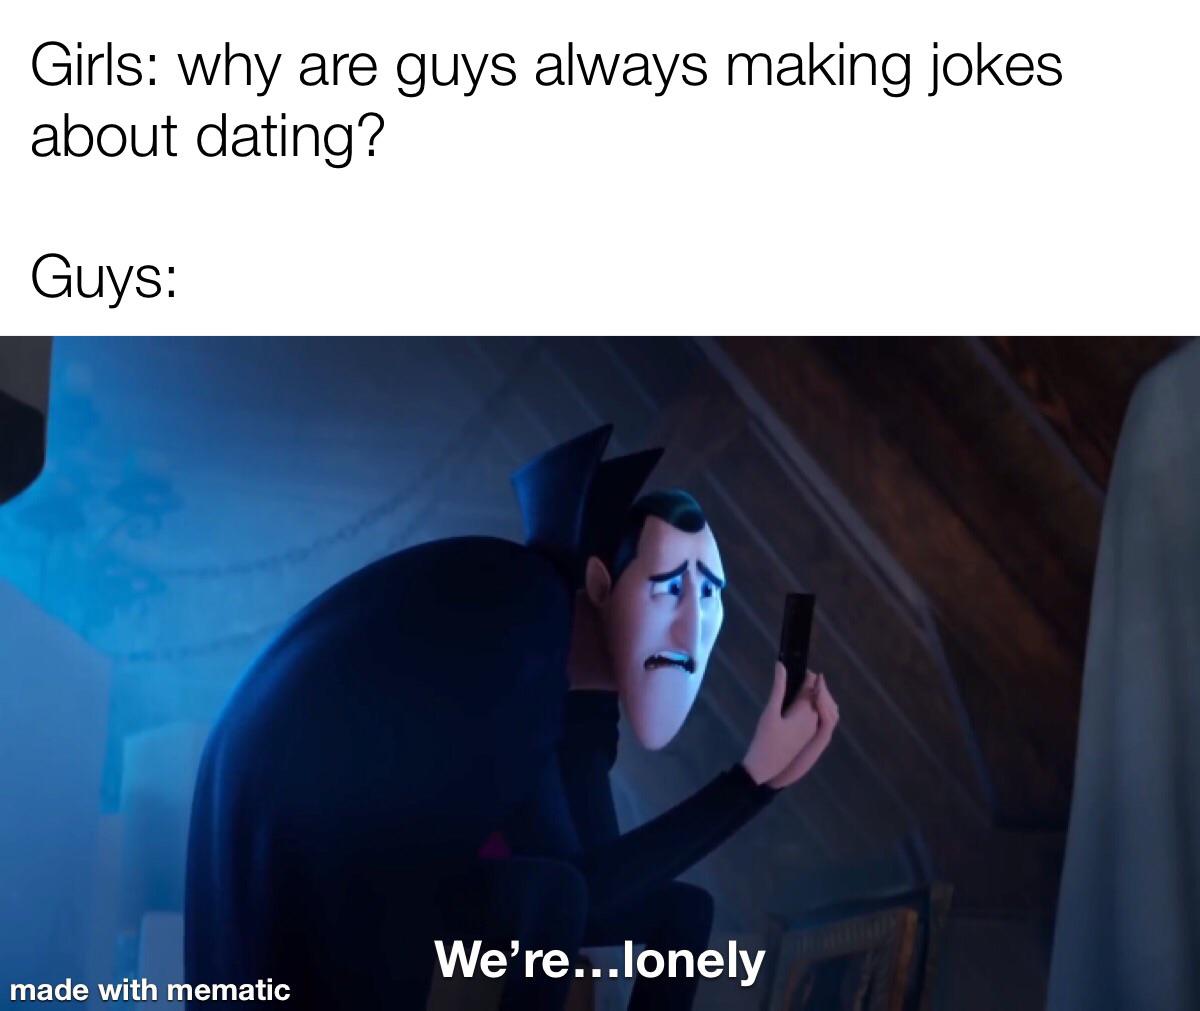 photo caption - Girls why are guys always making jokes about dating? Guys We're...lonely made with mematic